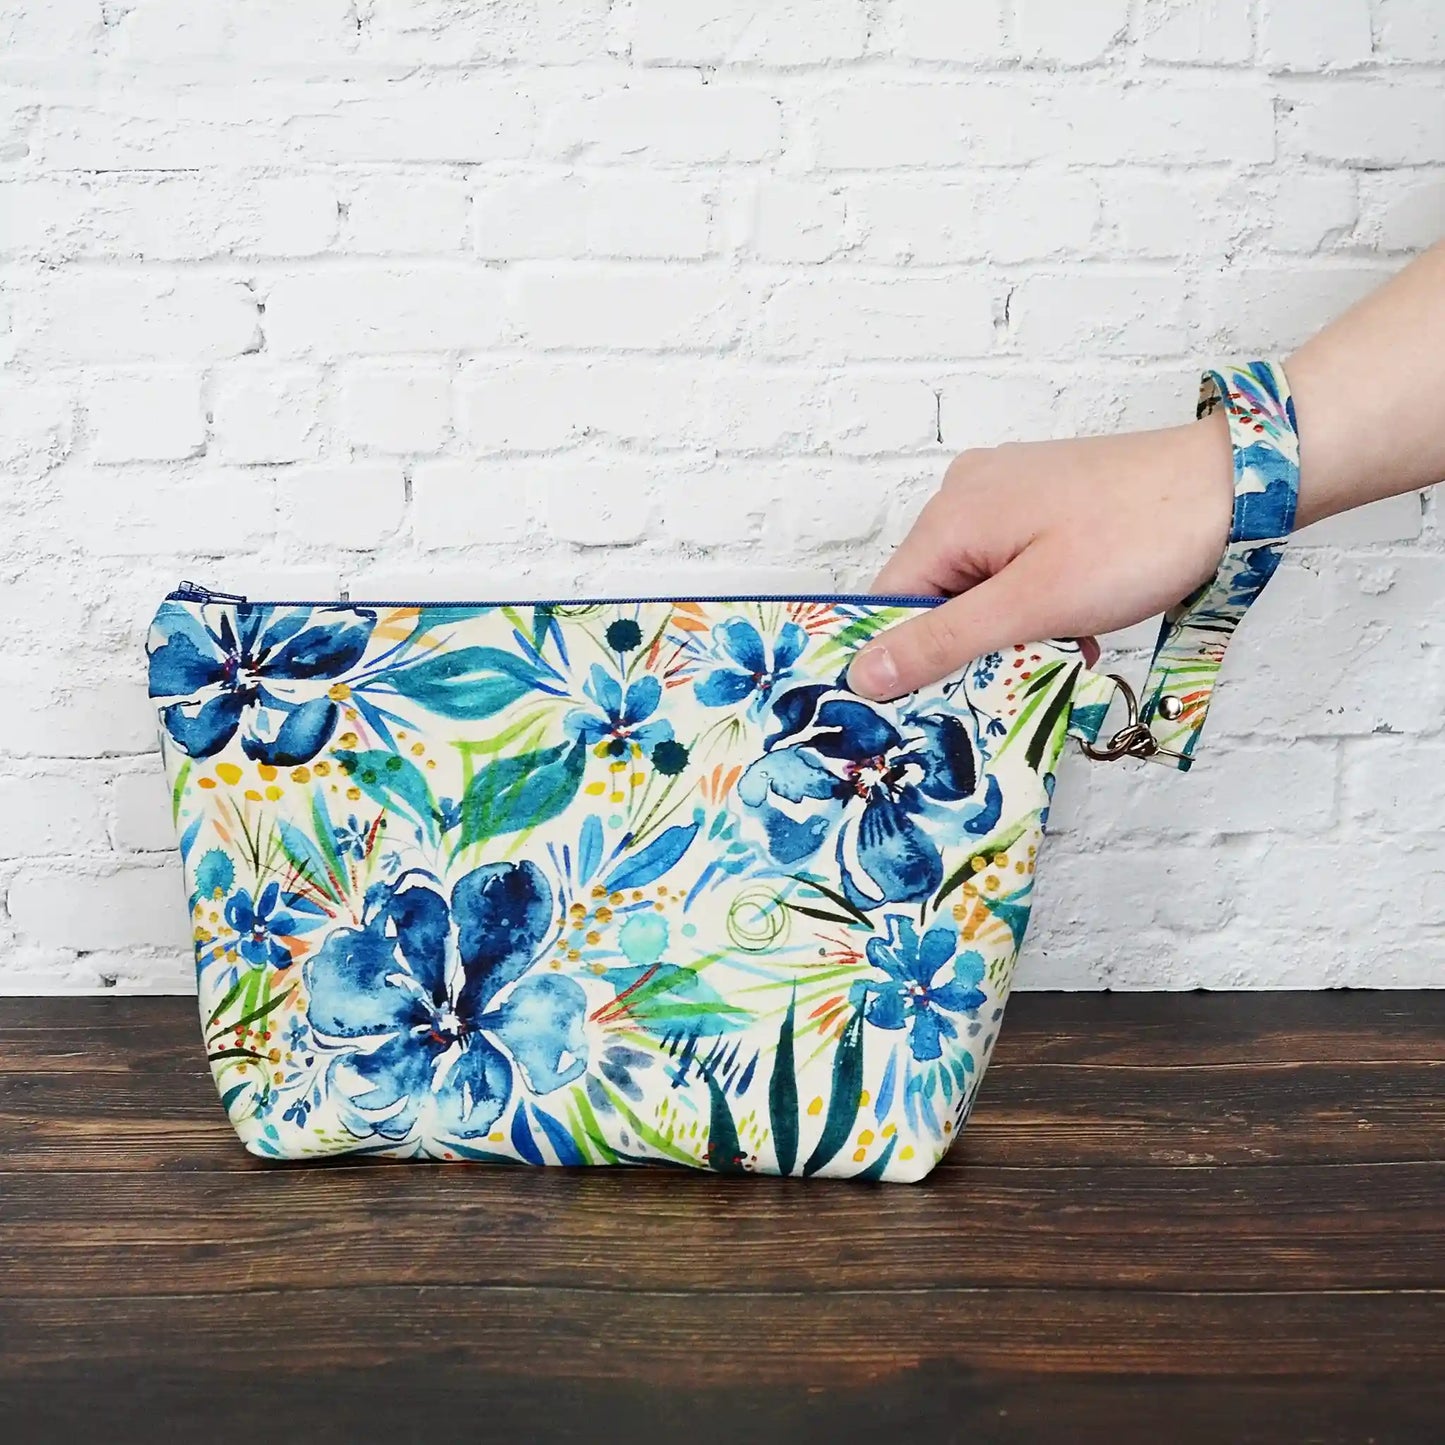 Watercolour print canvas zippered bag in blues and greens on natural canvas.  Made in Nova Scotia, Canada by Yellow Petal Handmade.